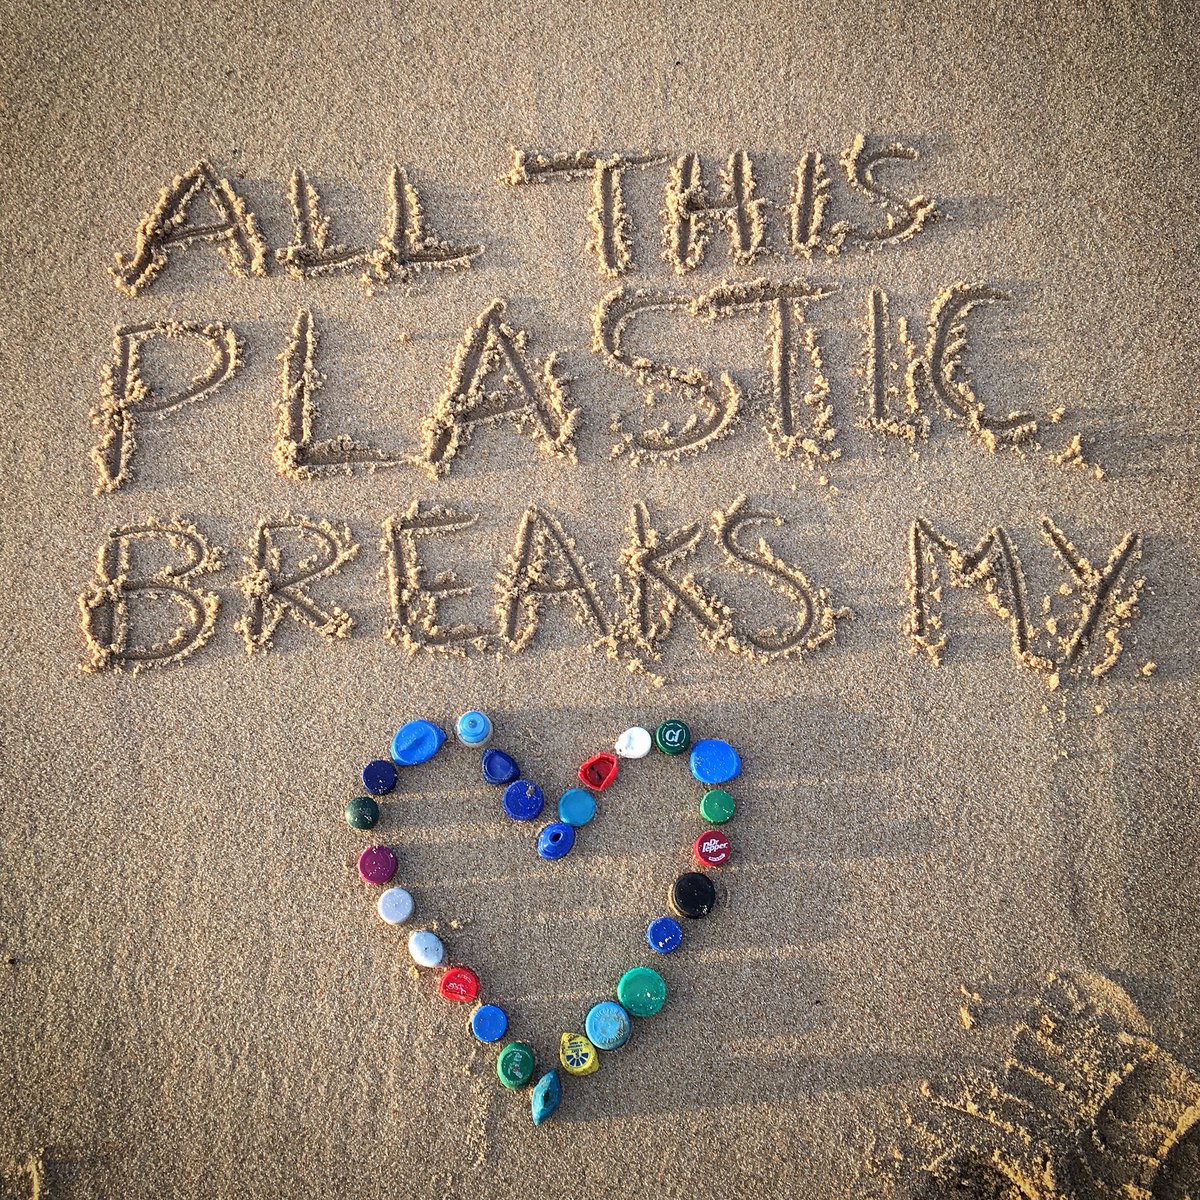 Help me mend my broken heart this #ValentinesDay. Use a little less plastic today and if you have time do a #2minutebeachclean #riverclean #streetclean #showyourbeachsomelove #plasticwaste #planetsuffolk